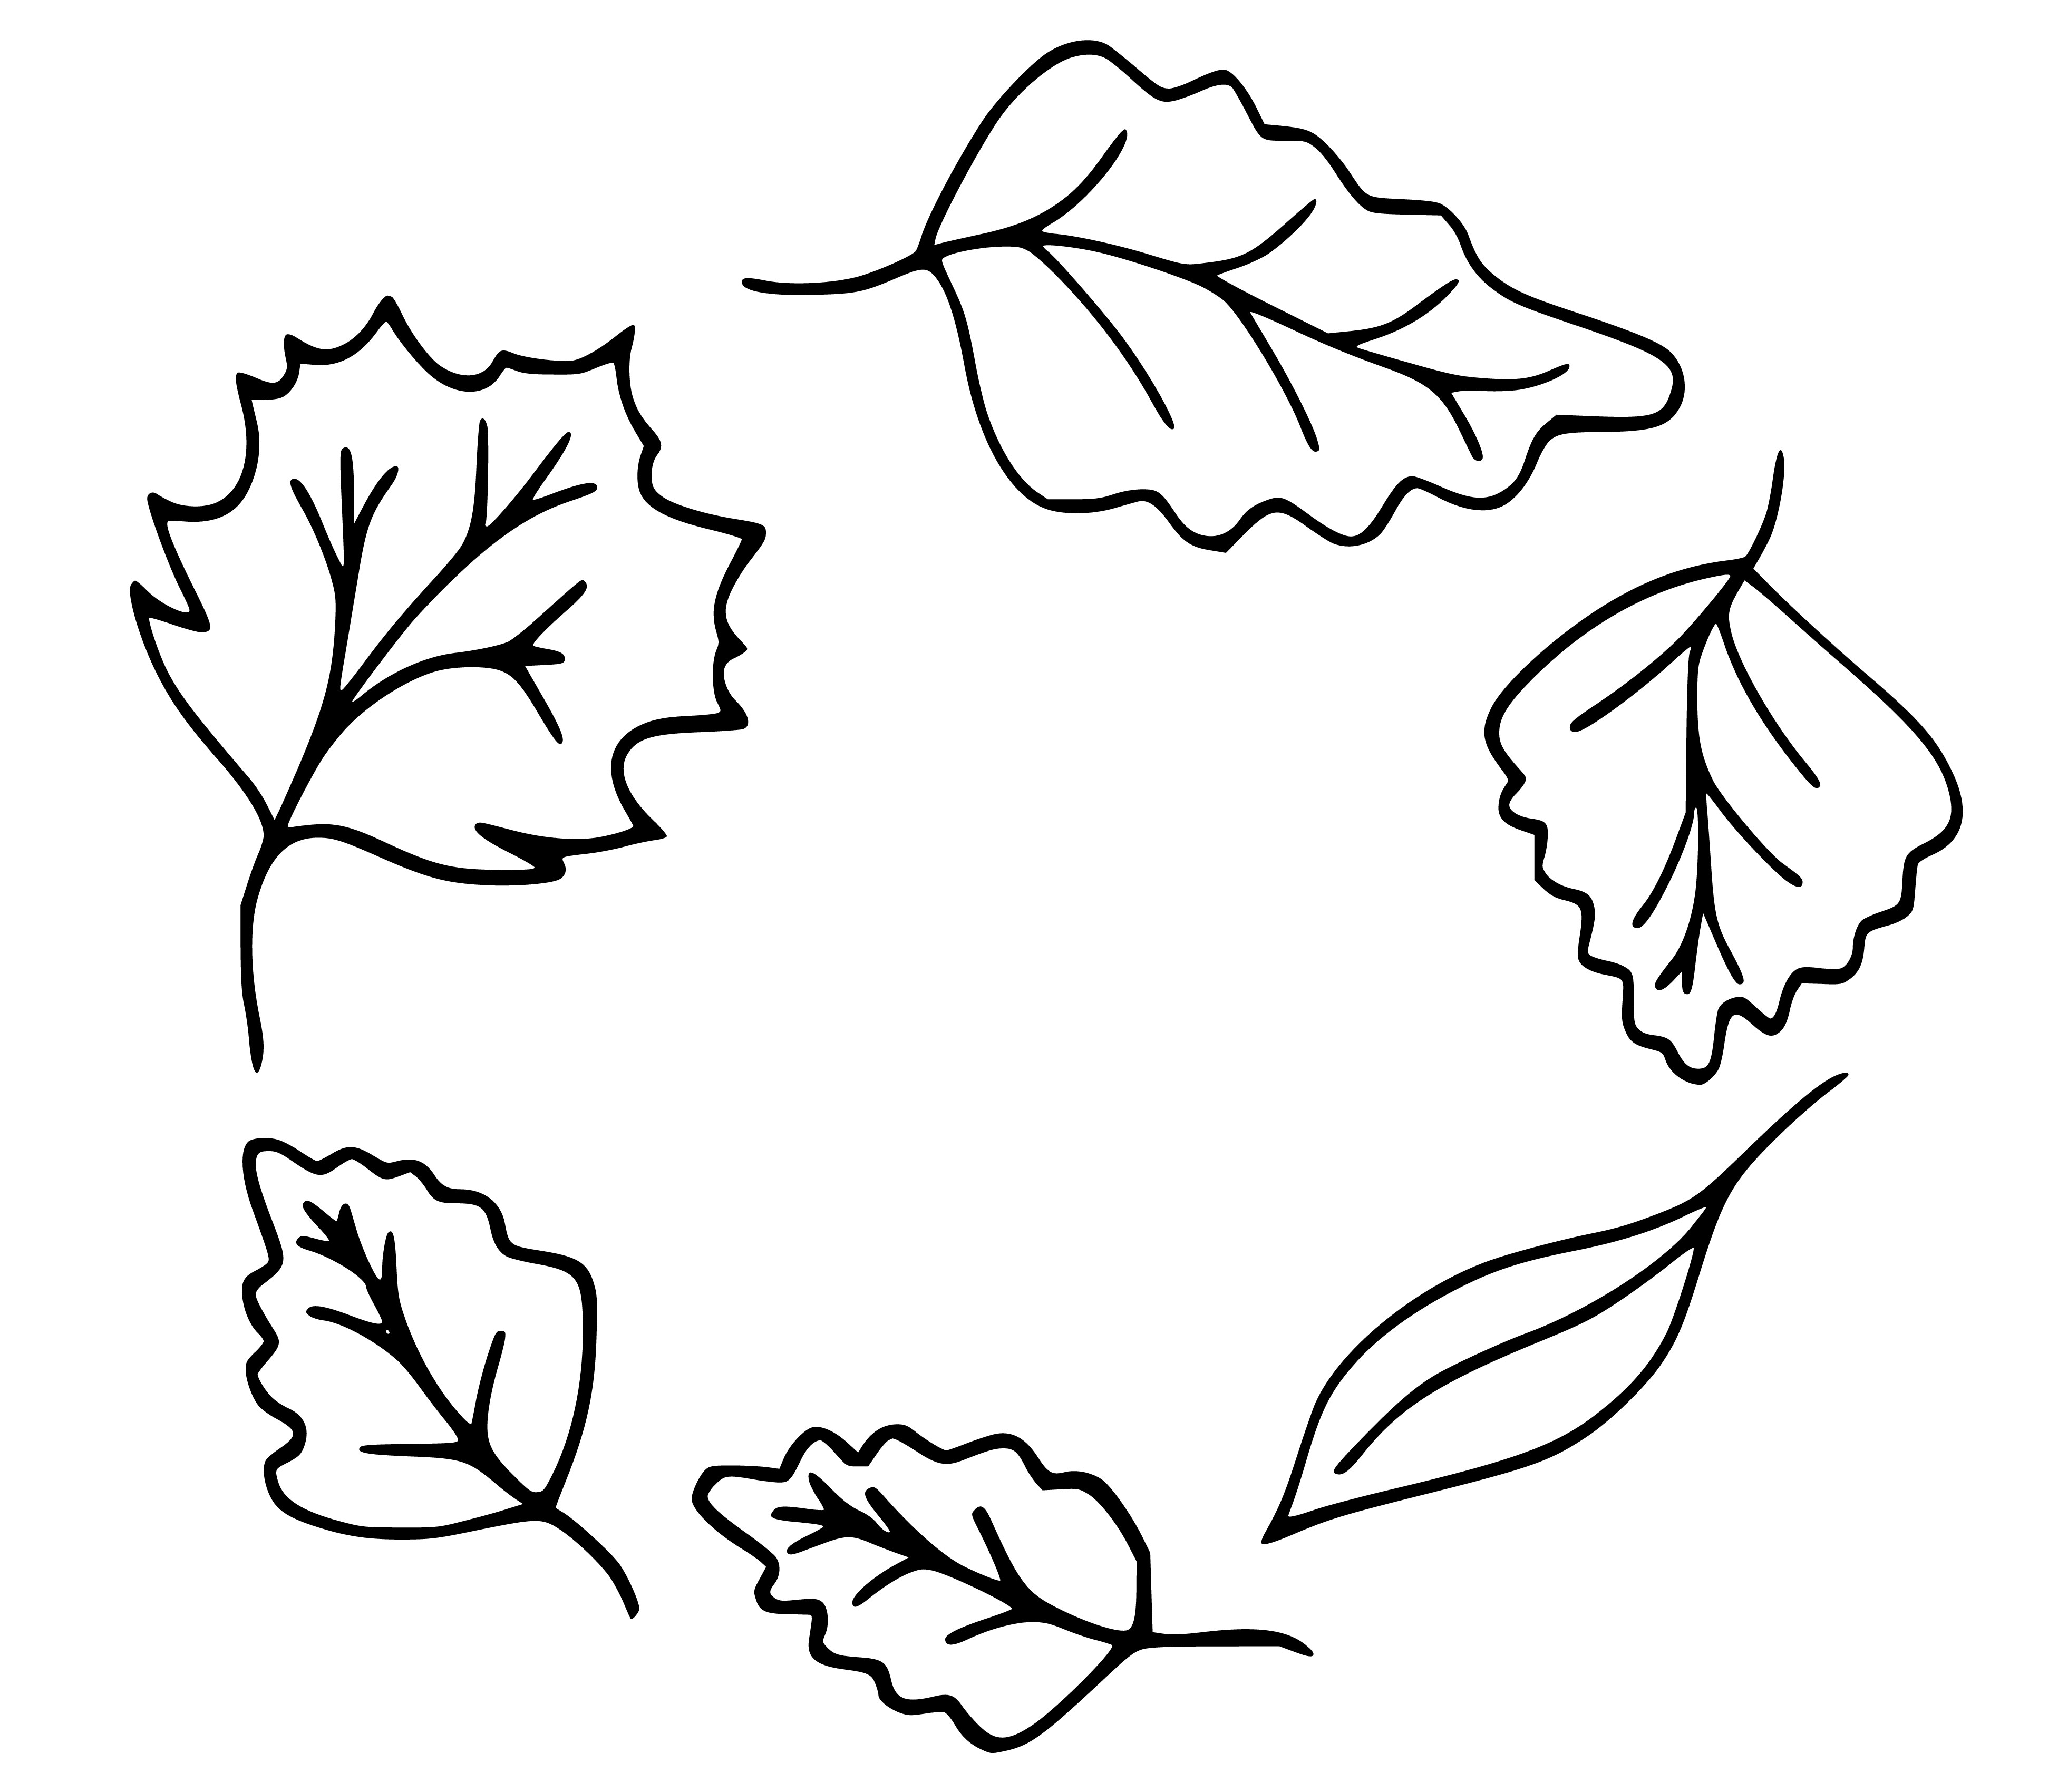 Printable Various Leaves Coloring Page for kids.